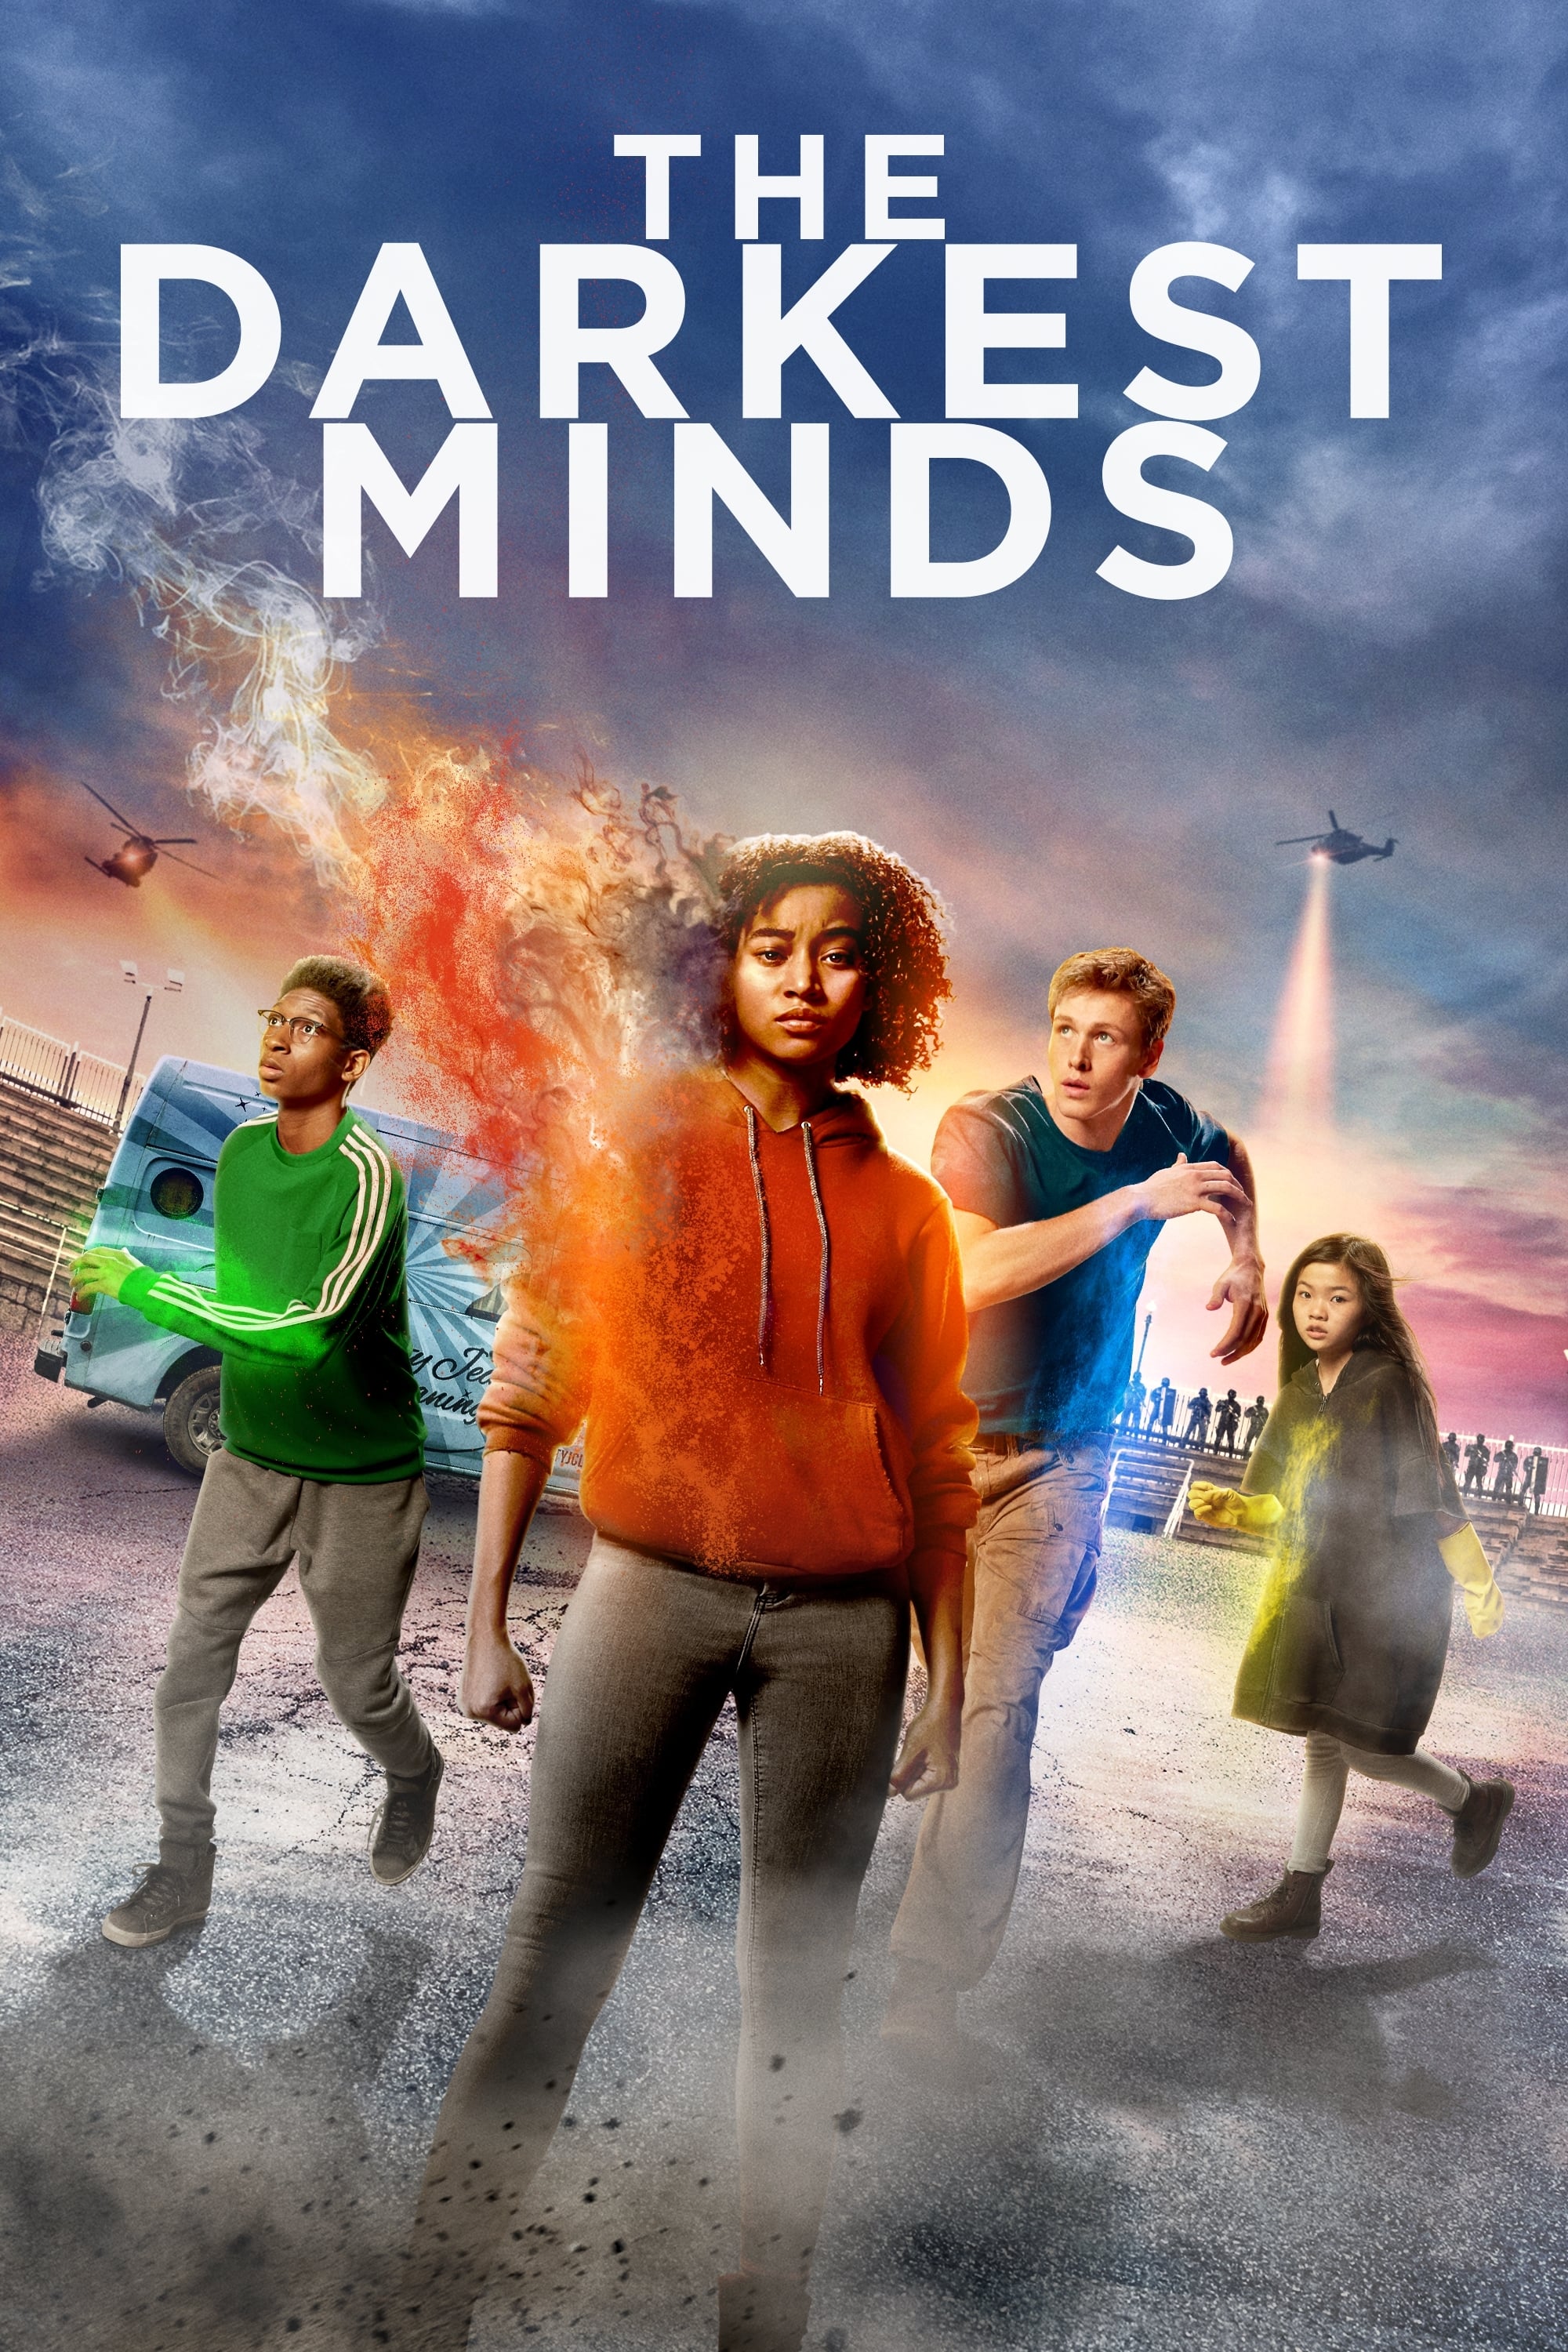 THE DARKEST MINDS 2018 Advance Teaser DS 2 Sided 27x40" US Movie Poster M Moore 